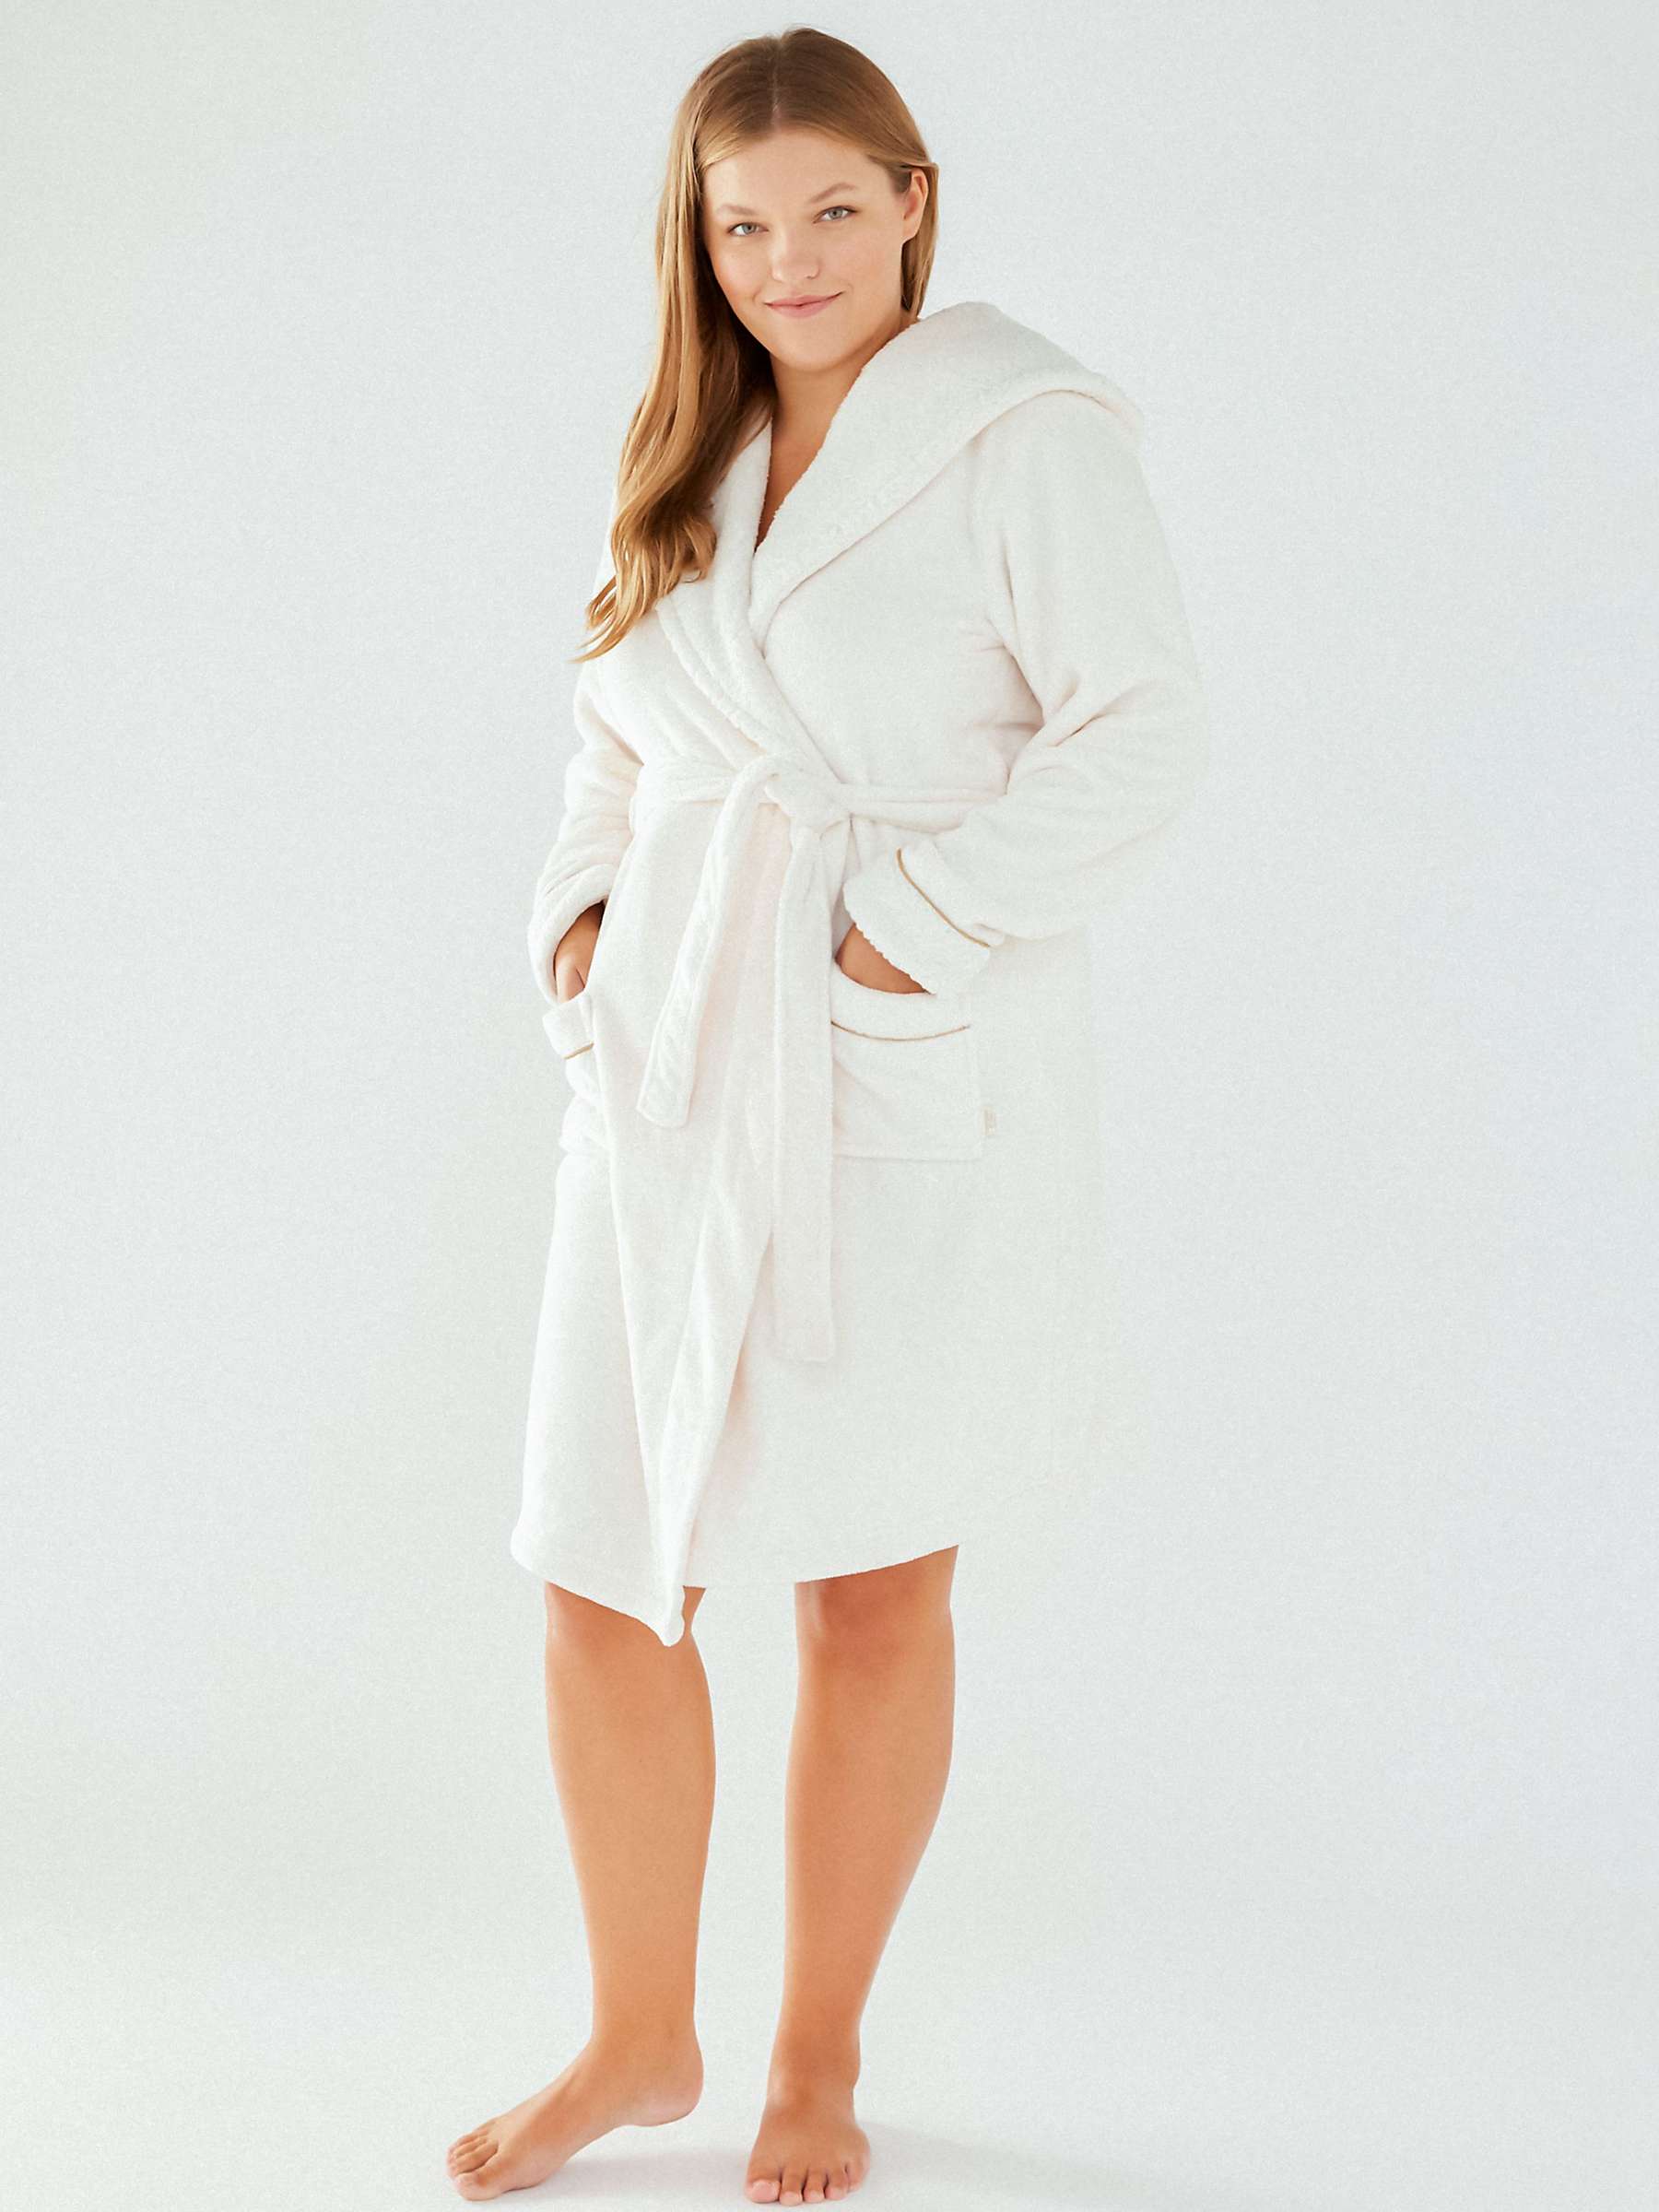 Buy Chelsea Peers Curve Fluffy Hooded Dressing Gown Online at johnlewis.com